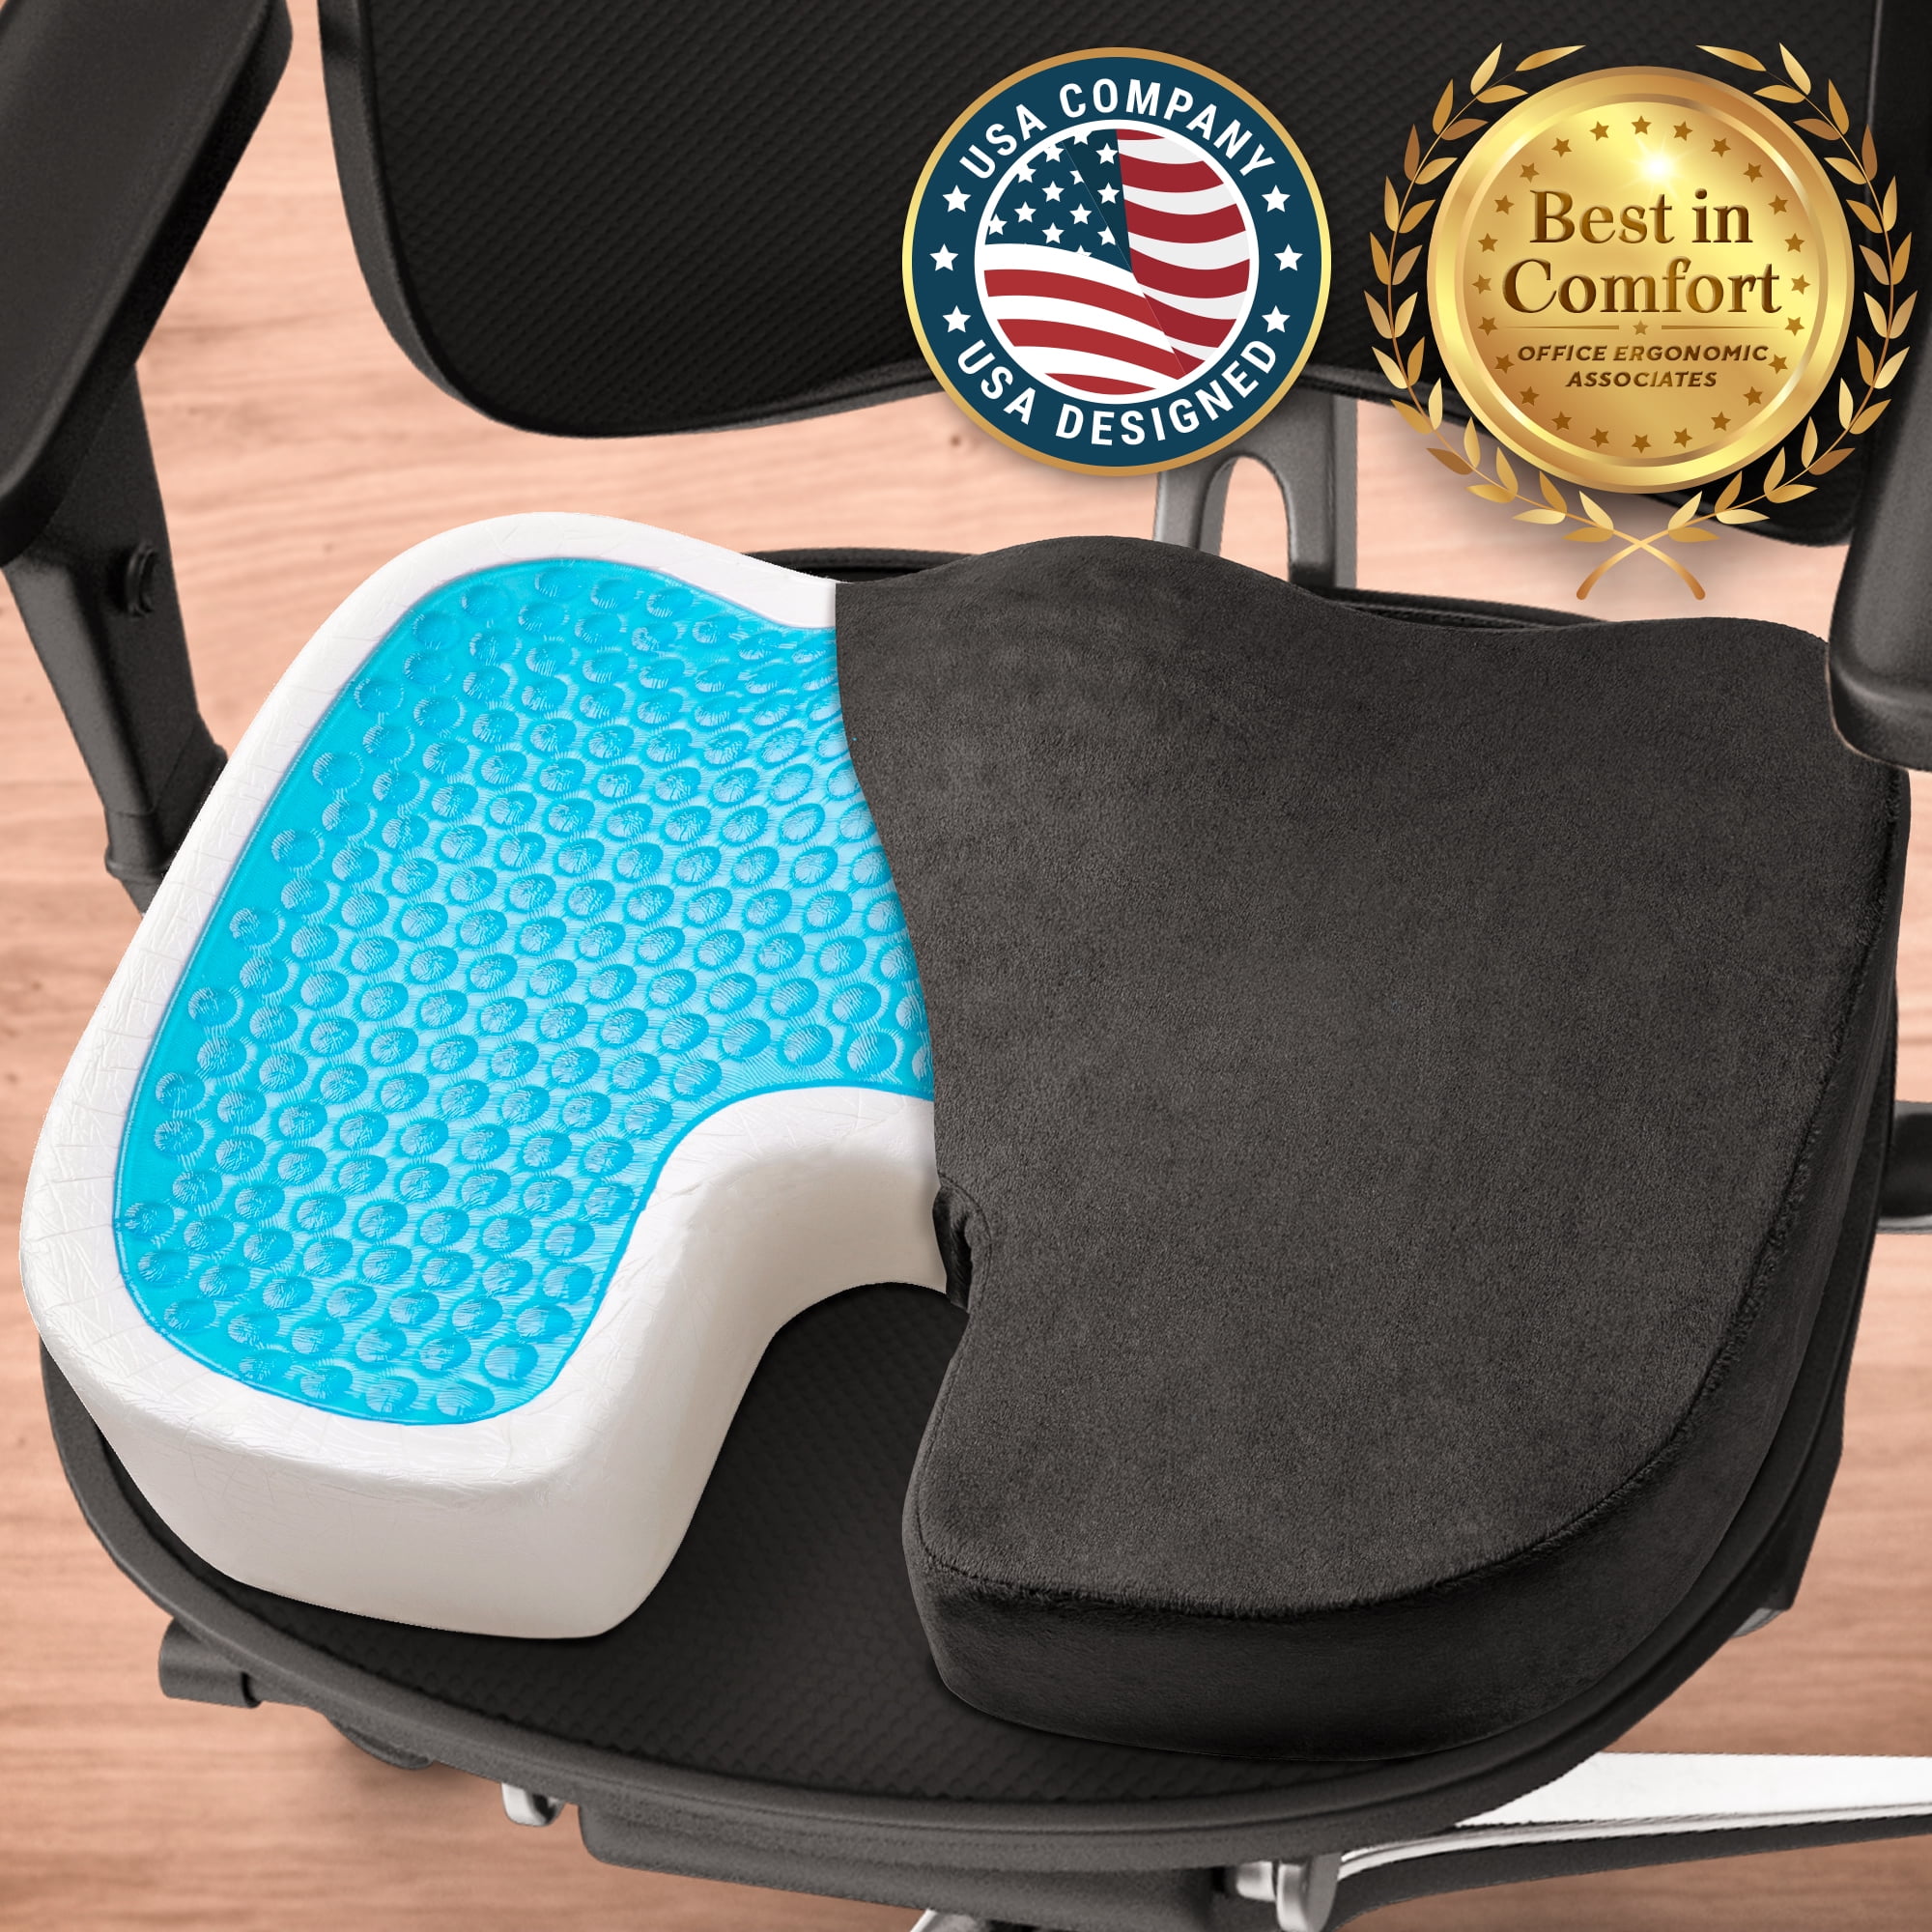 Cylen Home Office Seat Cushion - Comfort Memory Foam Chair Cushion with Cooling Gel Infused for Tailbone, Coccyx, Back & Sciatica Pain Relief (Grey)